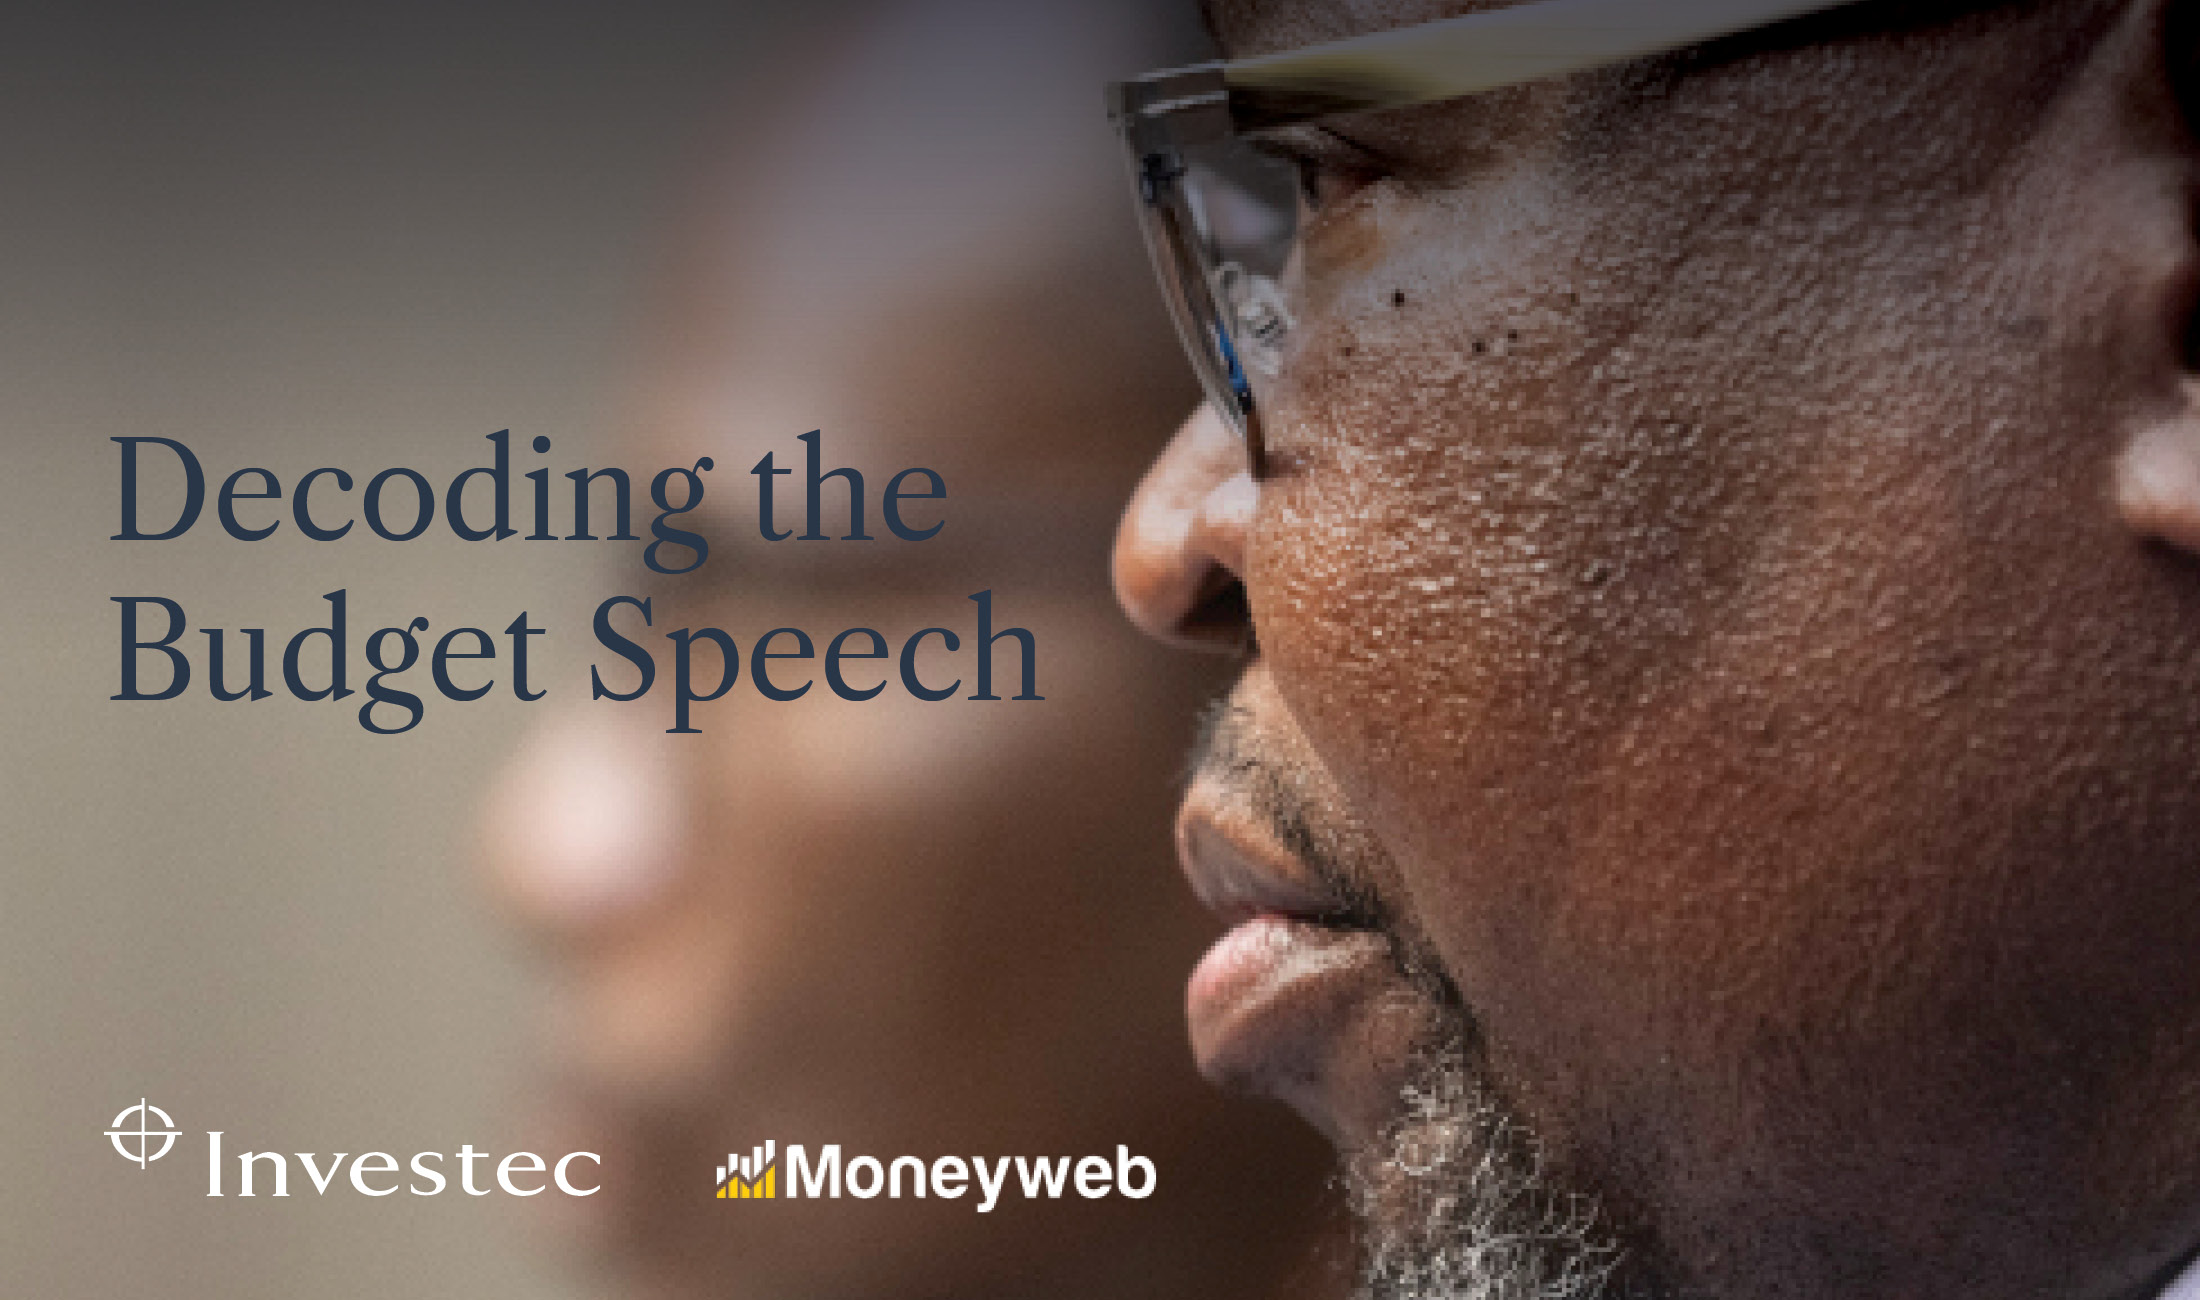 South Africa Finance Minister Enoch Godongwana on an Investec Moneyweb banner that says "Decoding the Budget Speech"